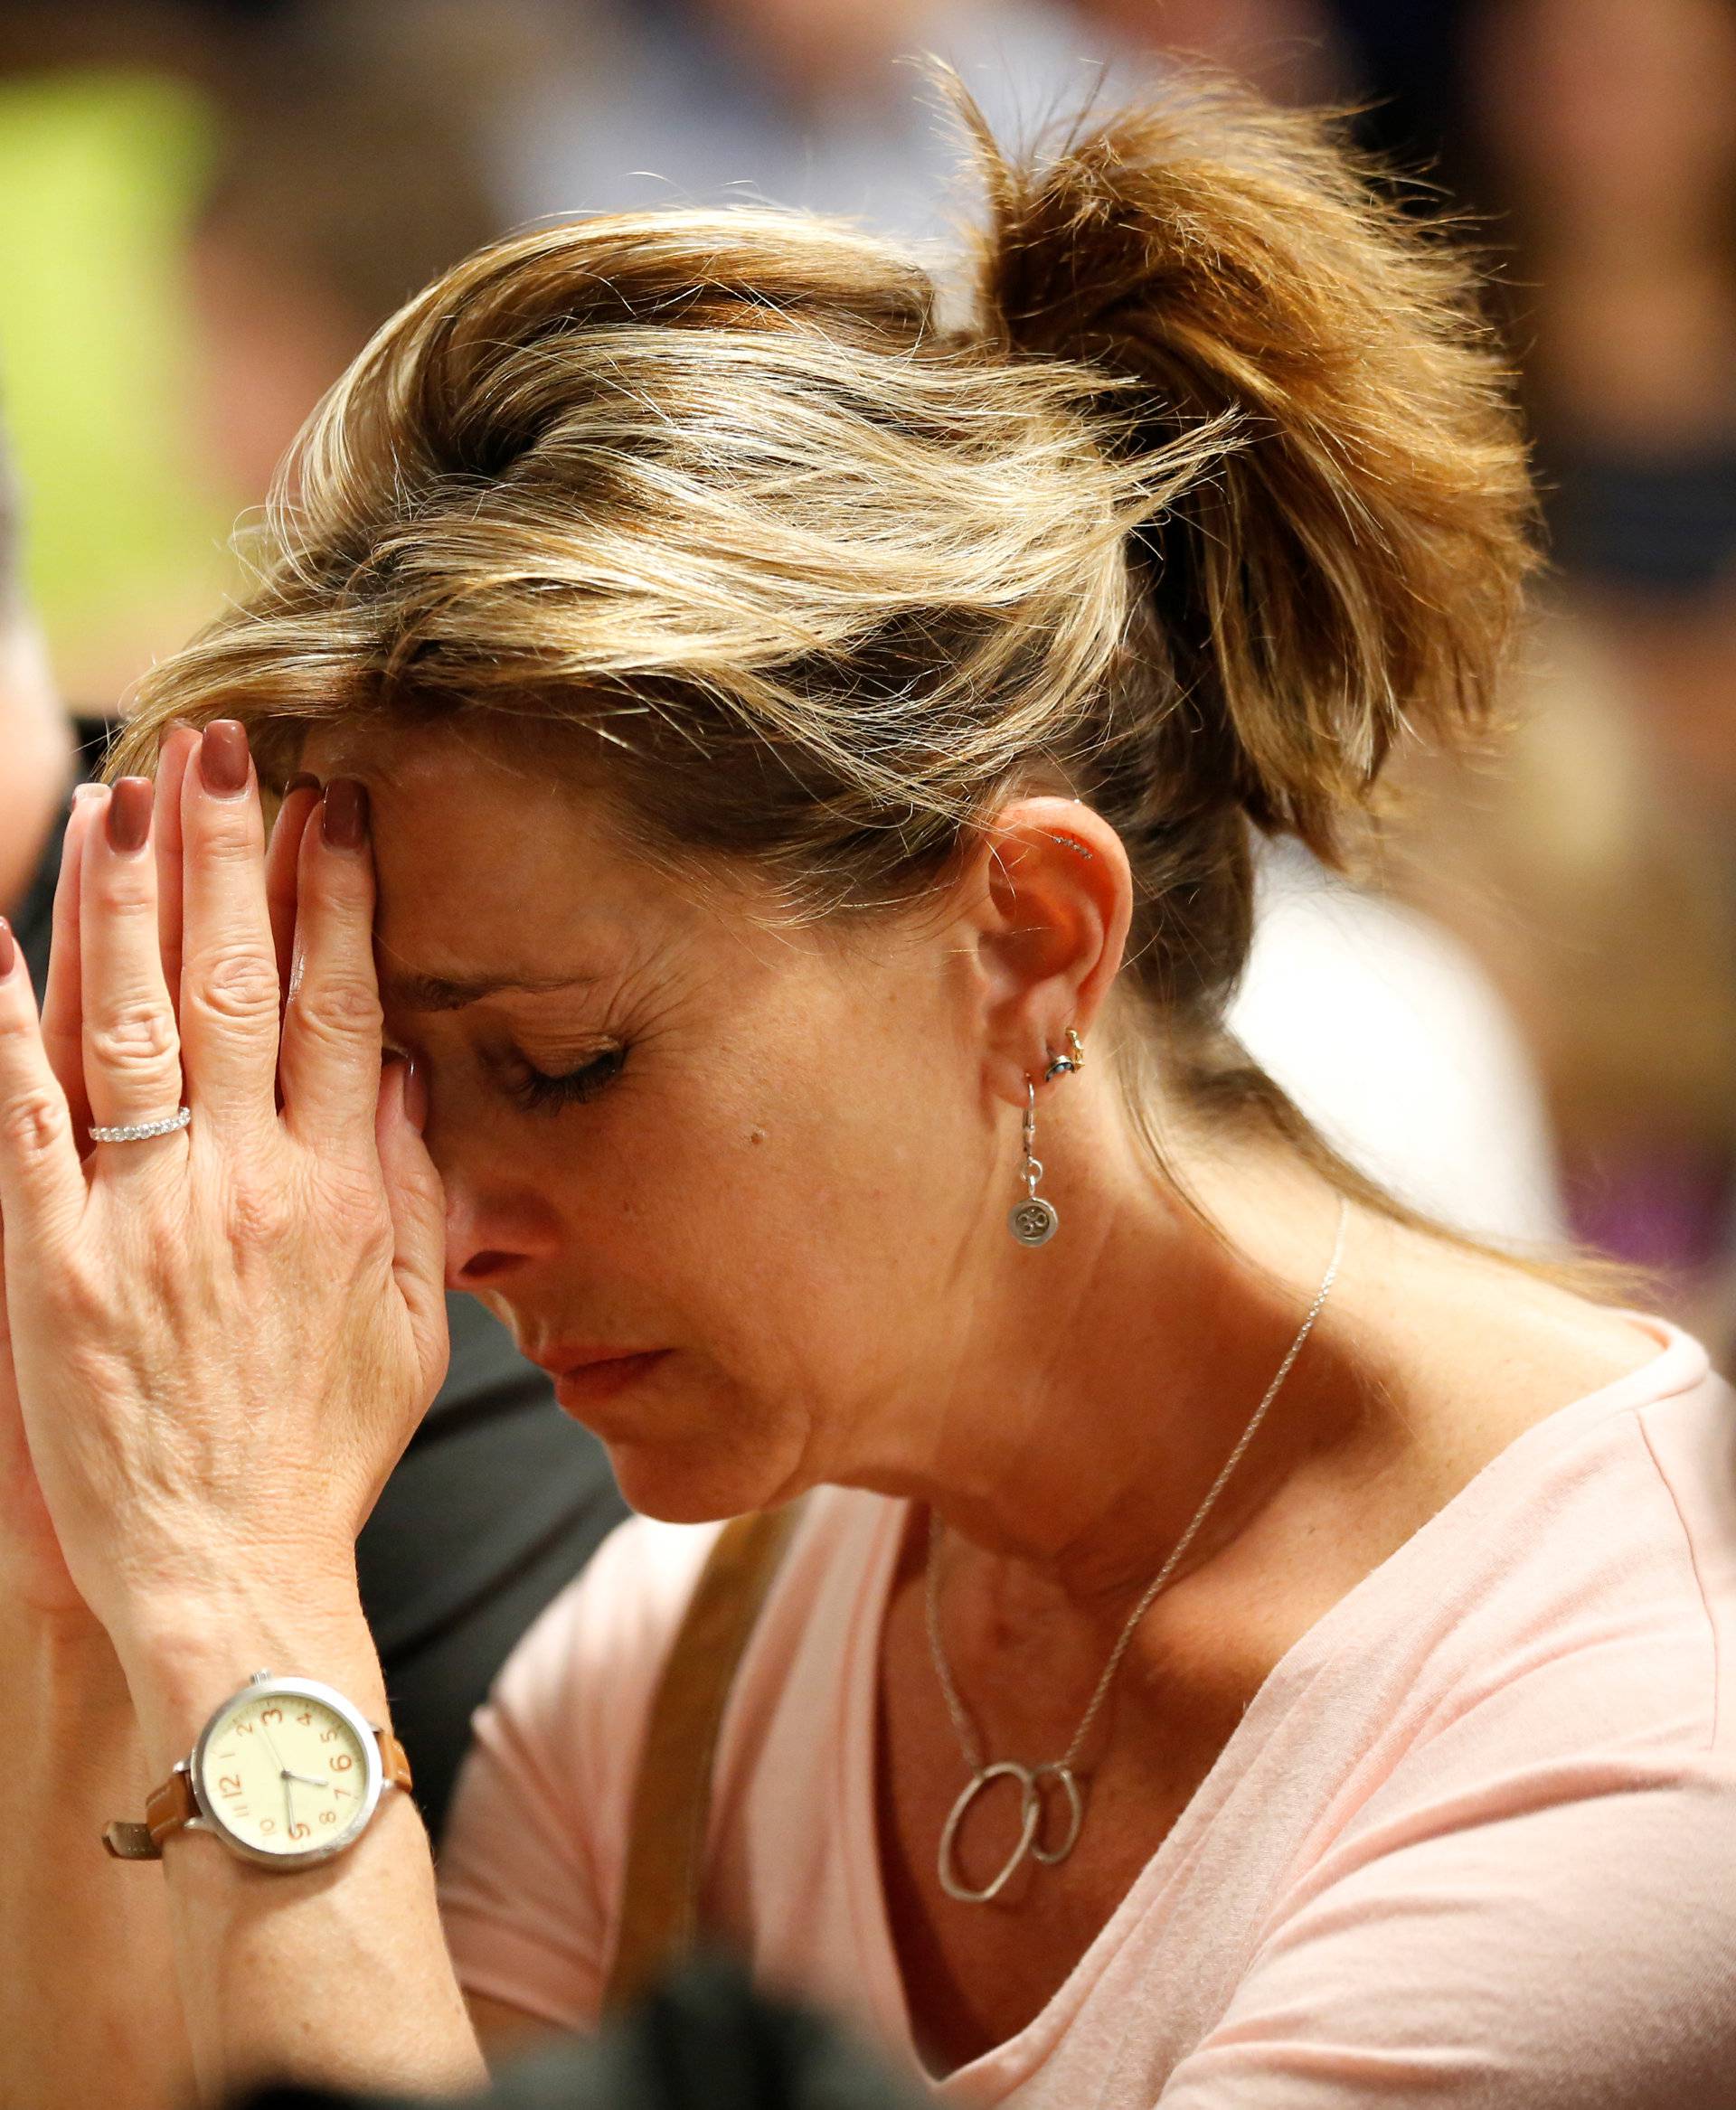 People pray during a vigil for the victims of a mass shooting in Las Vegas